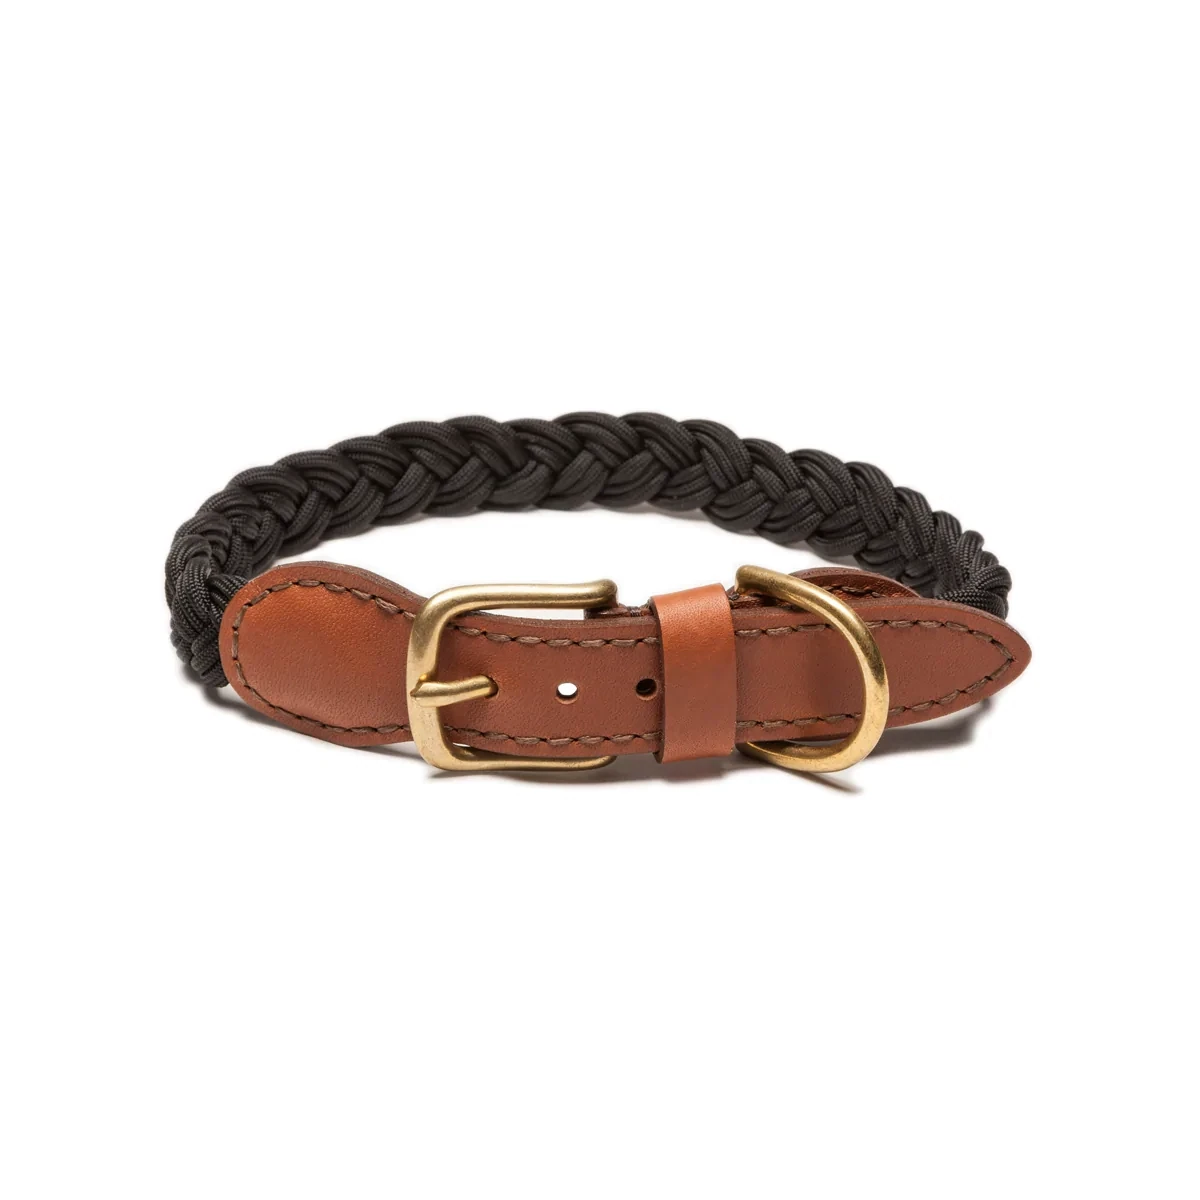 Knotty Pets - Braided Collar Black - Small